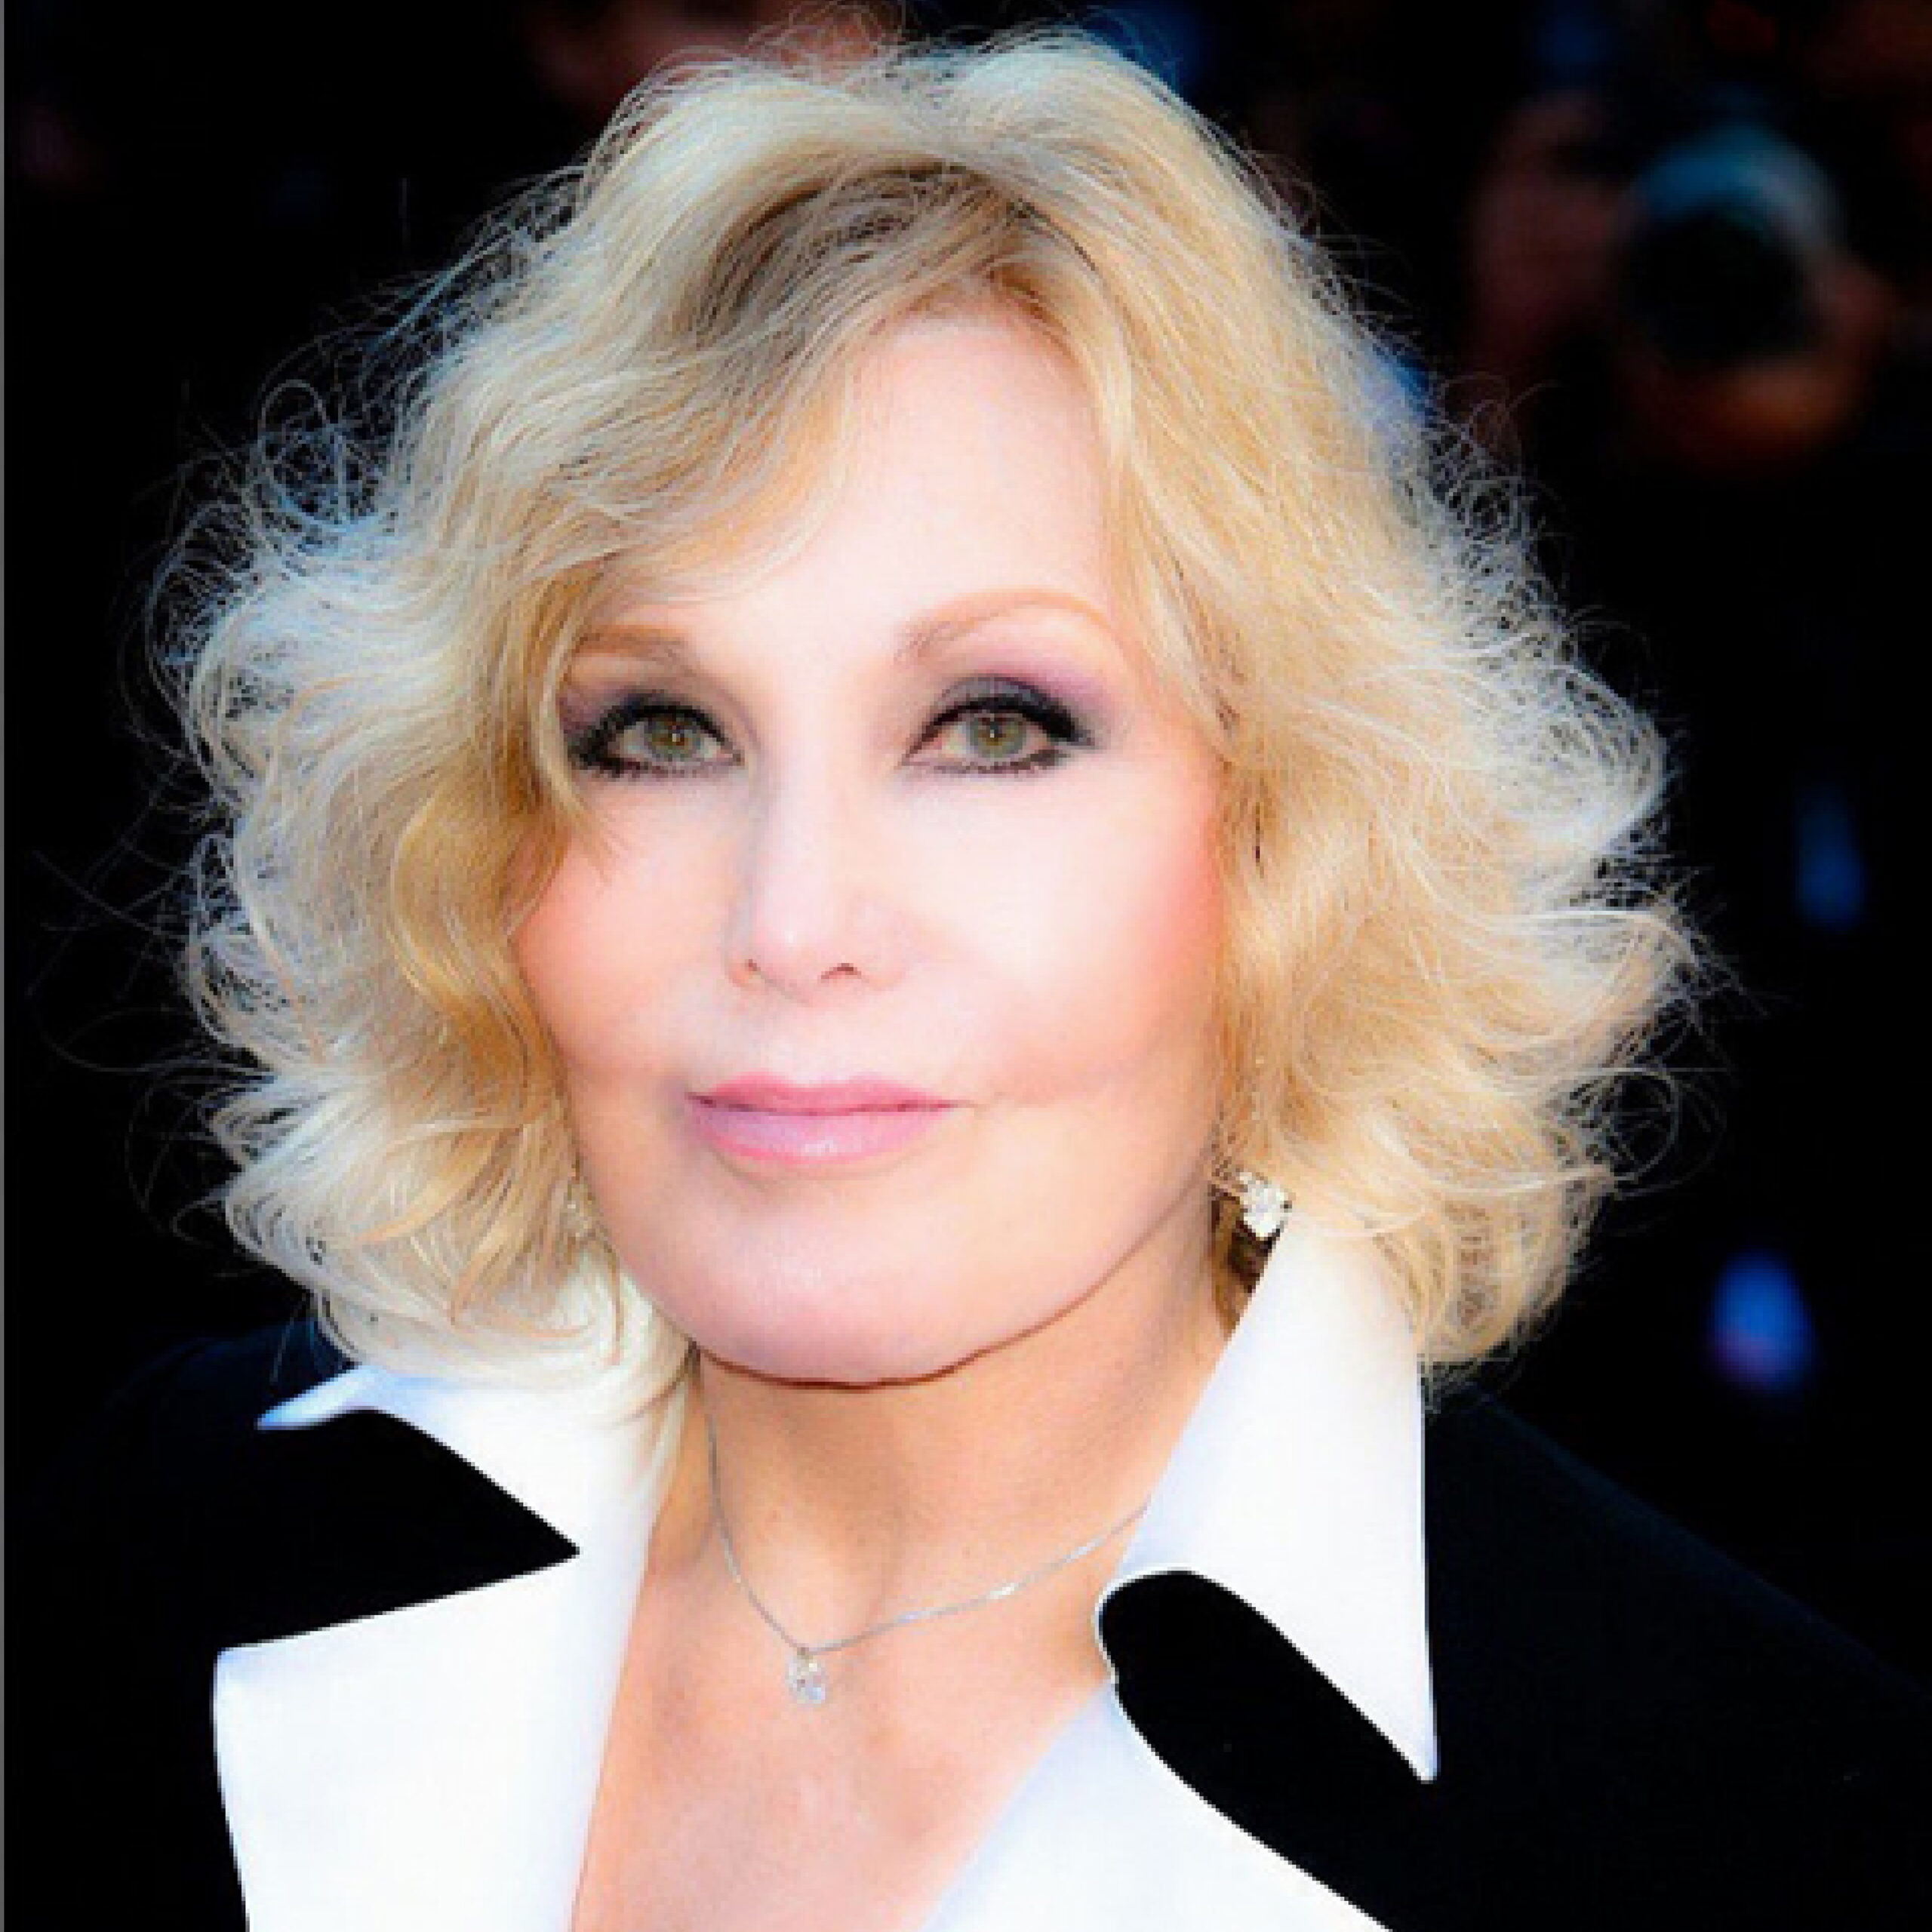 current (2023) headshot of legendary actress Kim Novak in promotion of her appearance on the 2023 TCM Classic Cruise